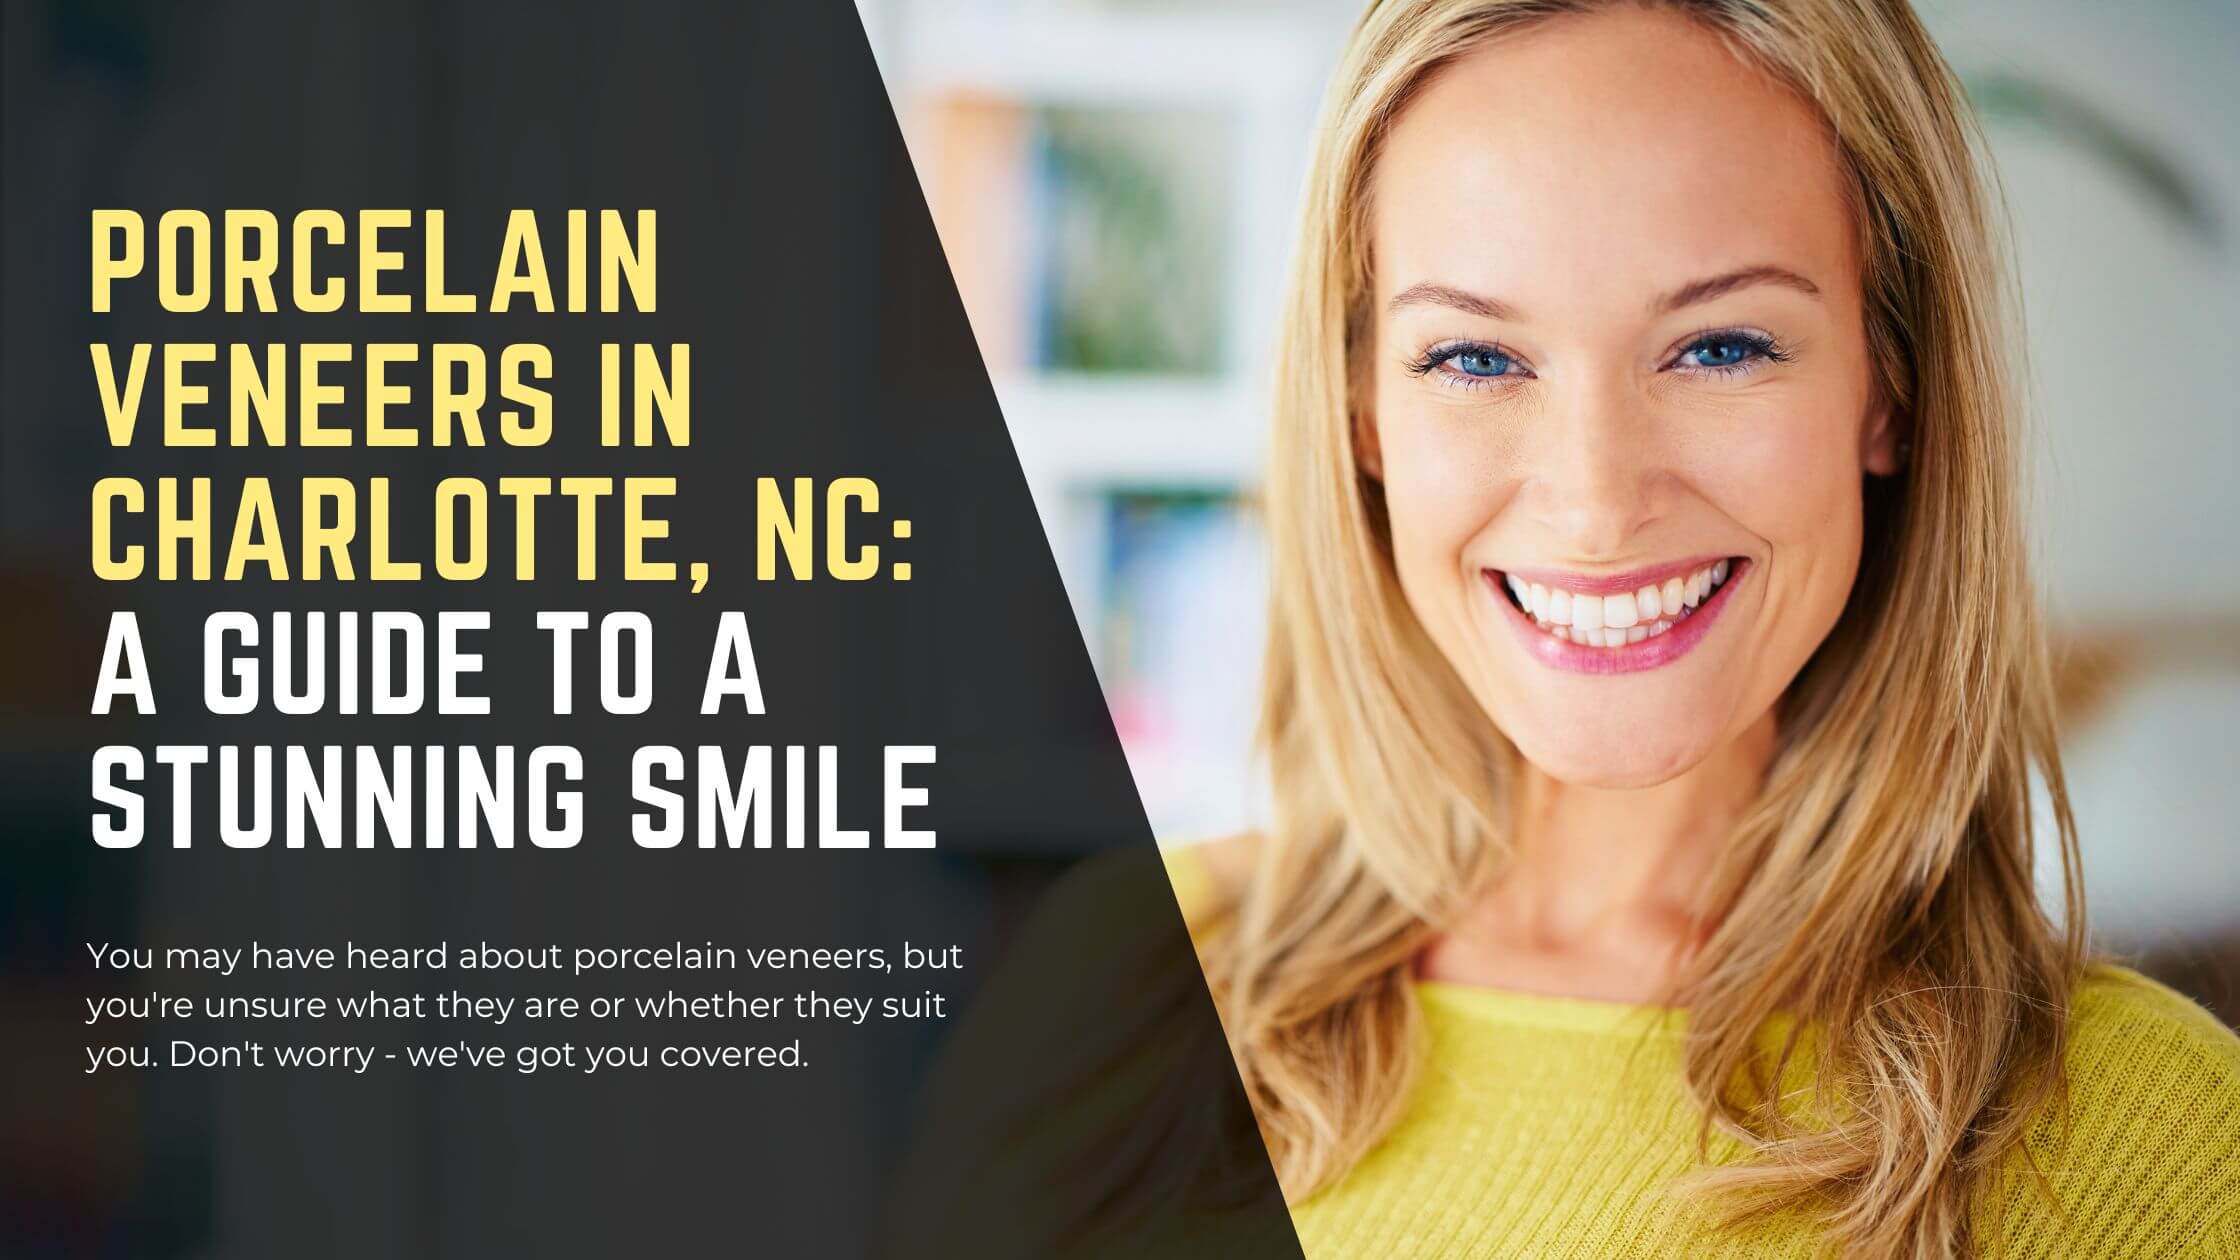 Porcelain Veneers in Charlotte, NC A Guide to a Stunning Smile - District Dentistry Charlotte